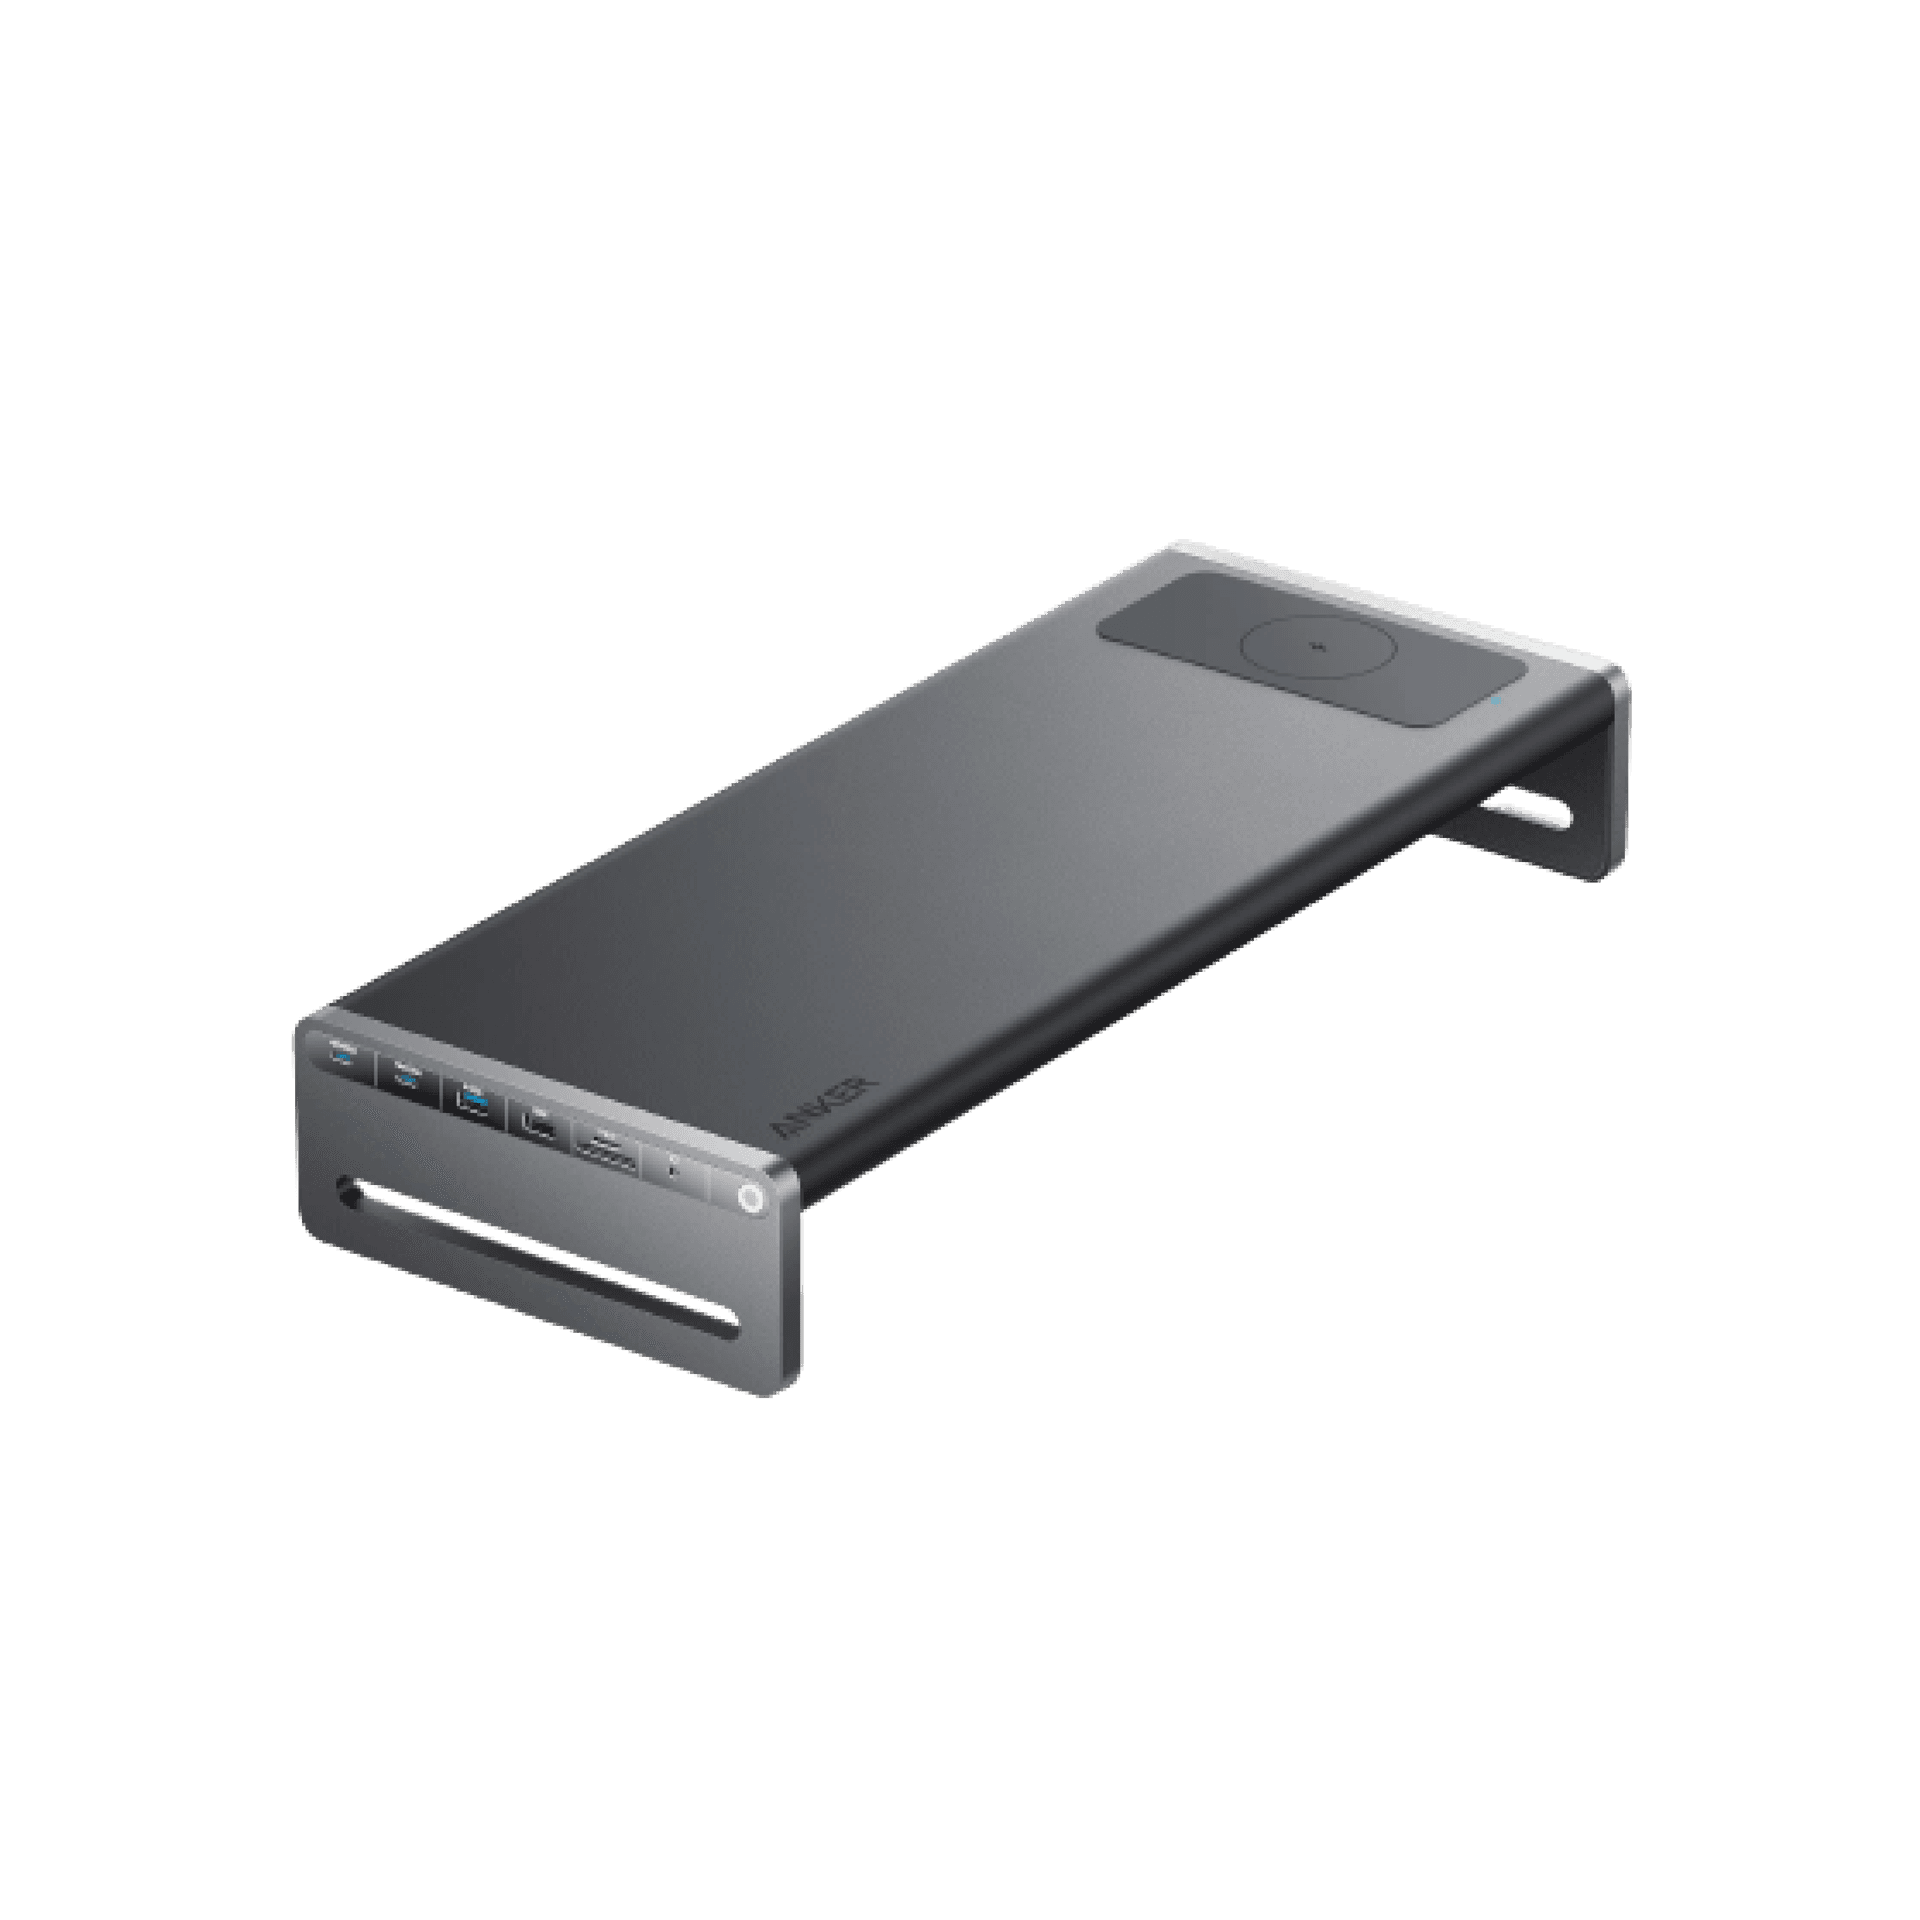 Anker <b>675</b> USB-C Docking Station <br>(12-in-1, Monitor Stand, Wireless)